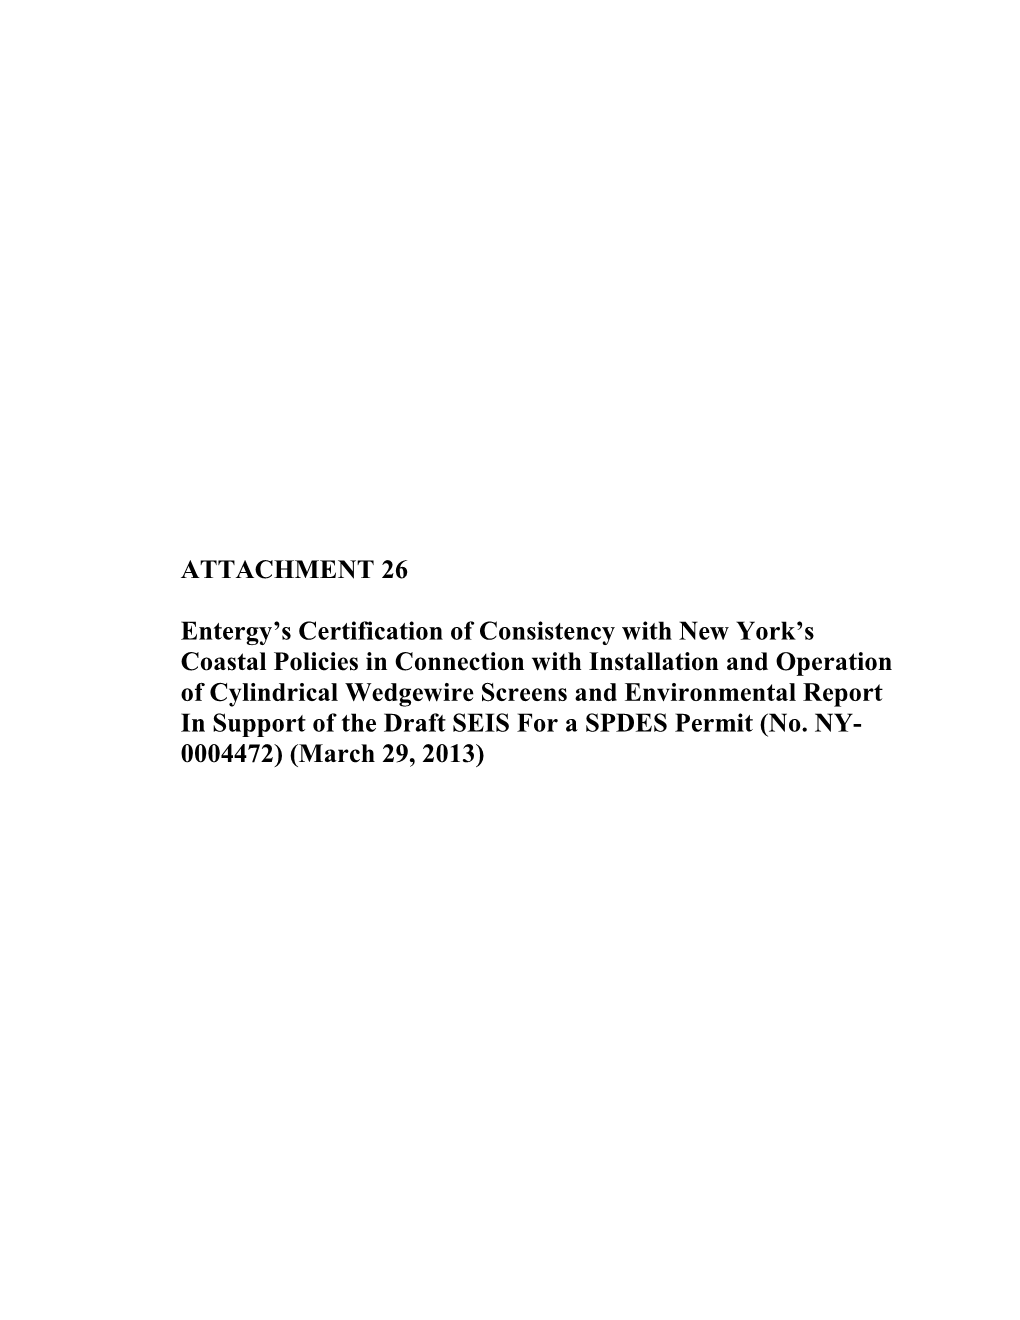 Attachment 26 Entergy's Certification of Consistency with New York's